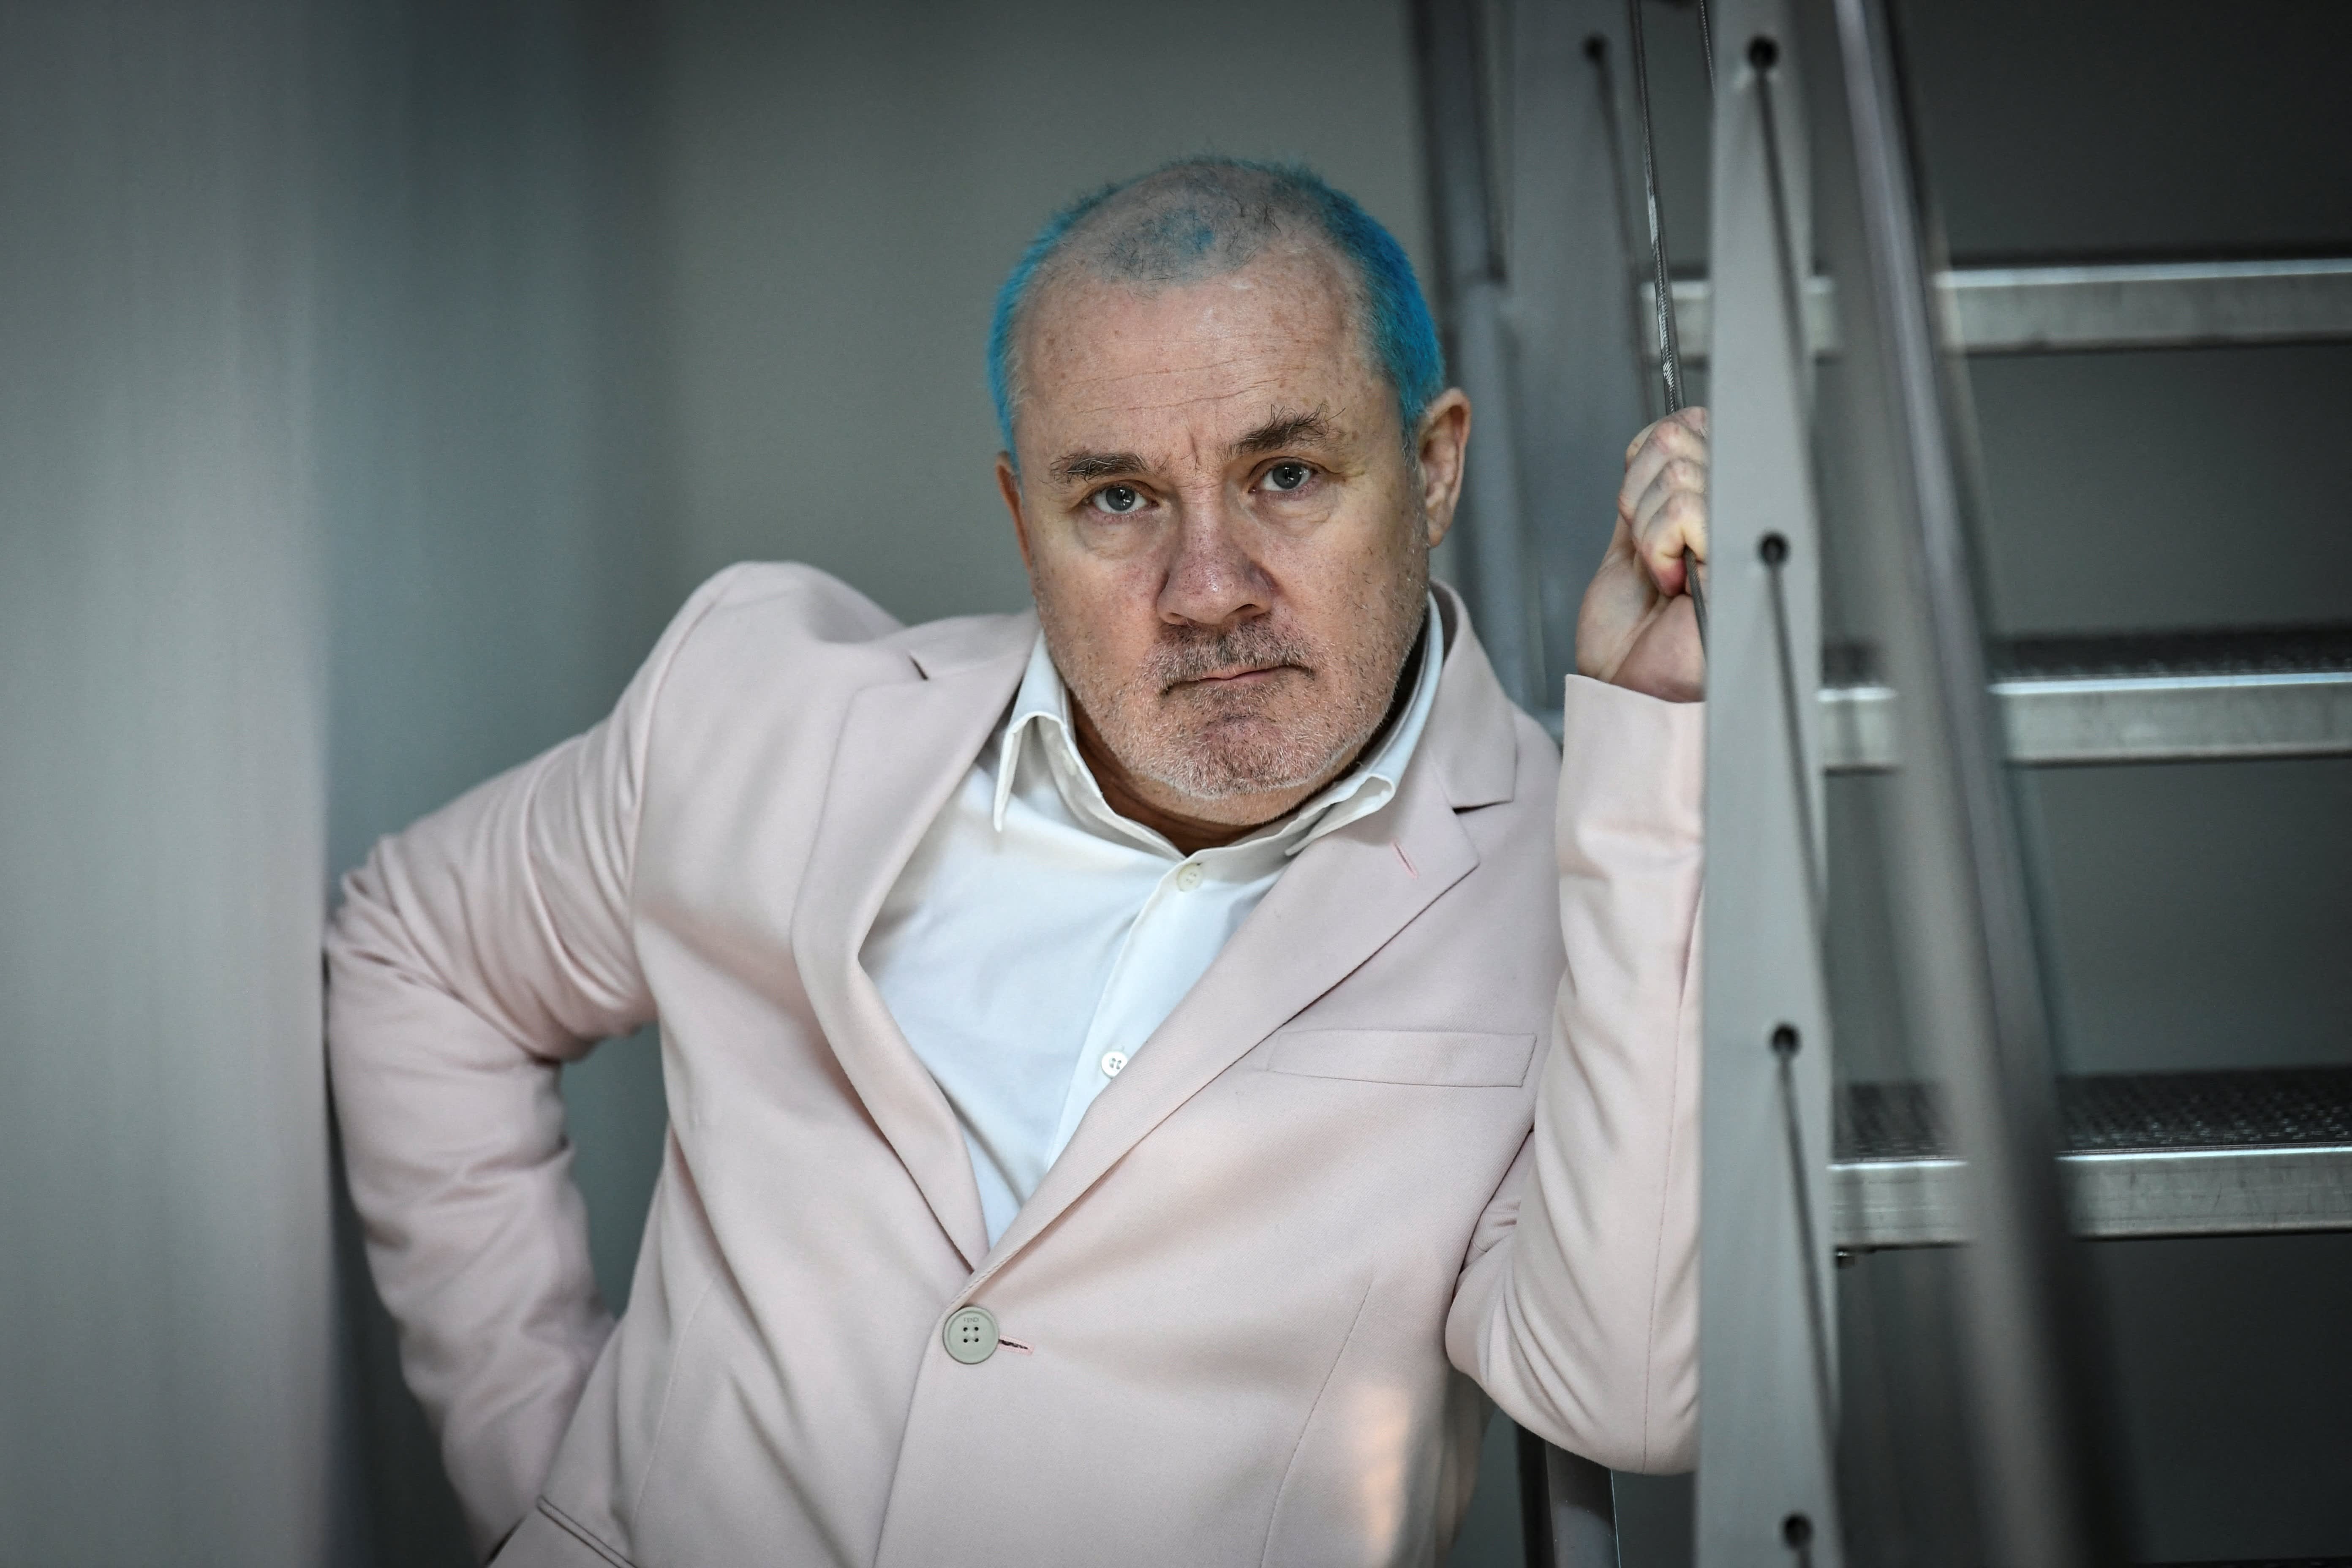 NFTs may outlast physical art galleries, says famed British artist Damien Hirst